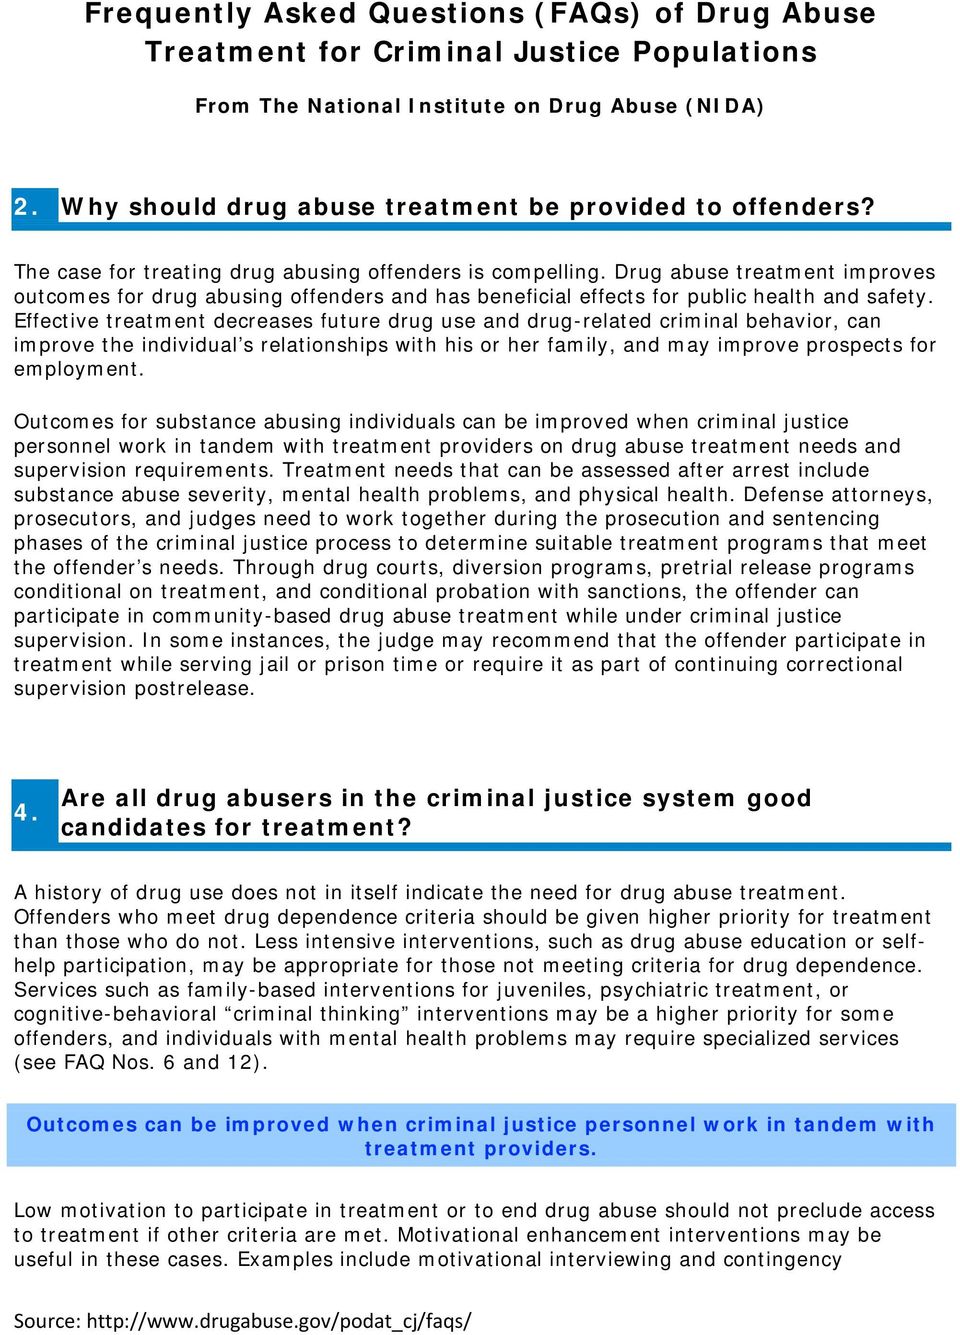 Effective treatment decreases future drug use and drug-related criminal behavior, can improve the individual s relationships with his or her family, and may improve prospects for employment.